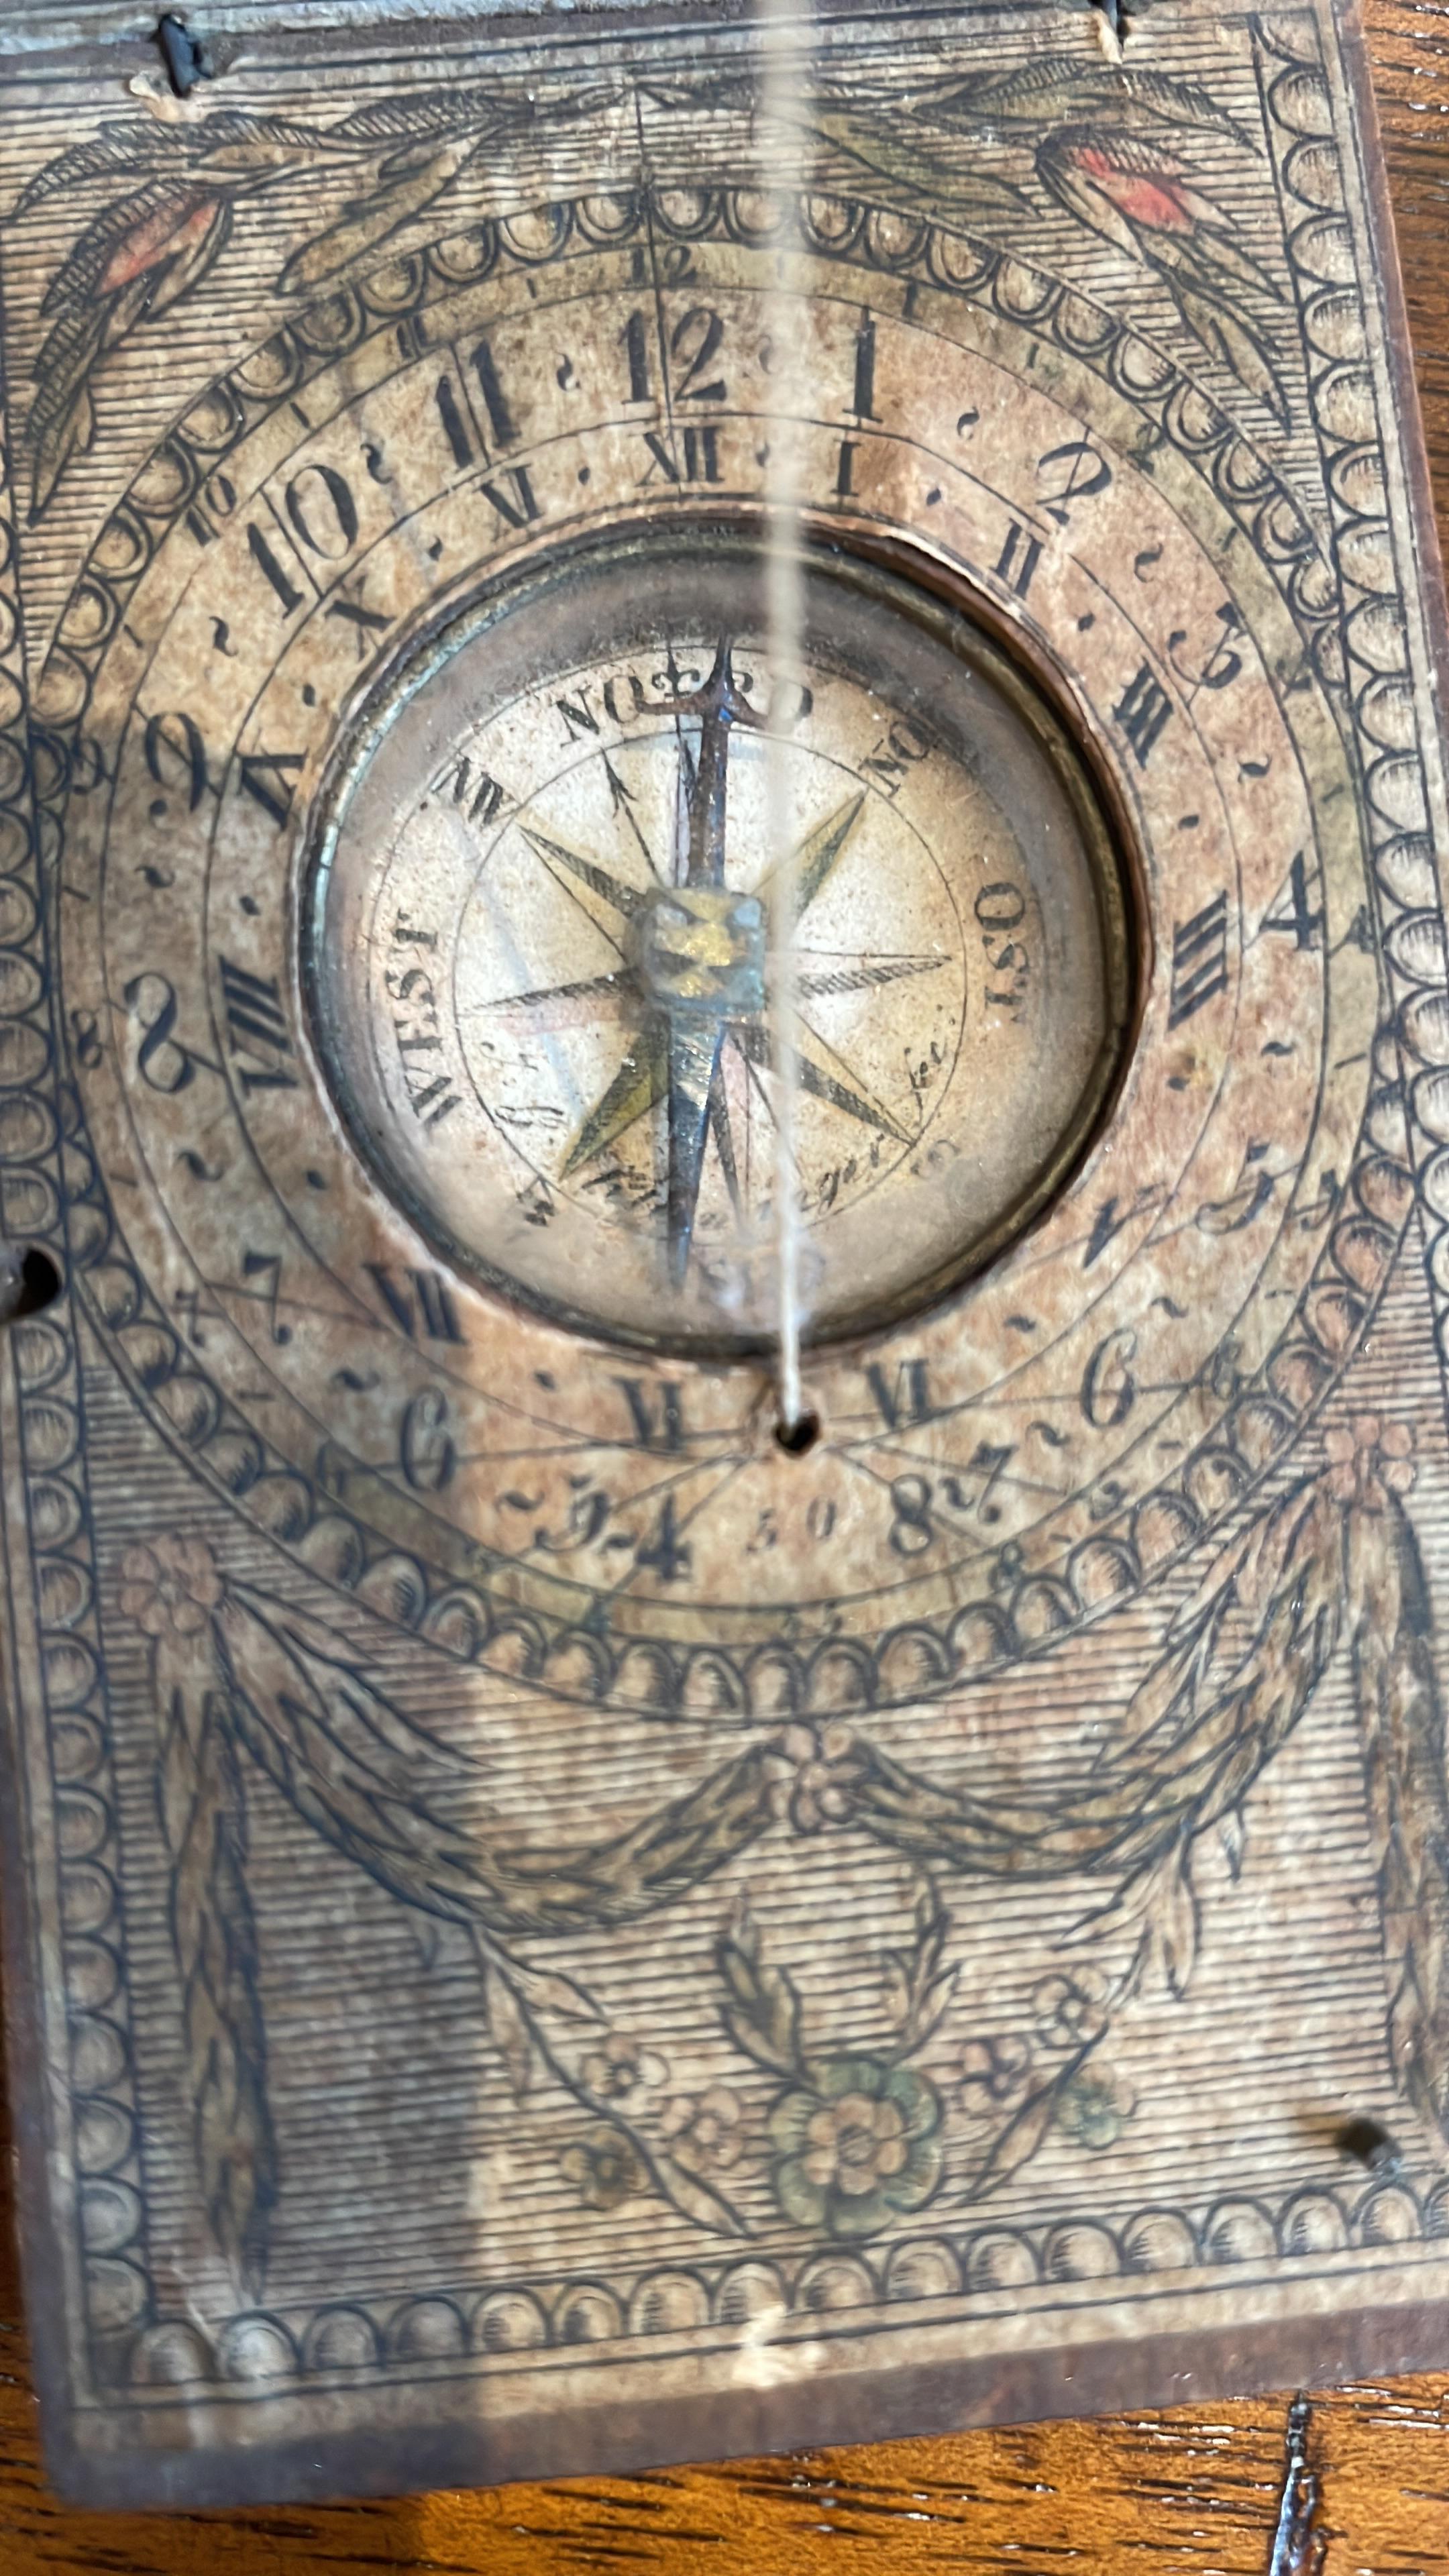 18th Century Diptych Portable Sundial And Compass by German Kleininger 3